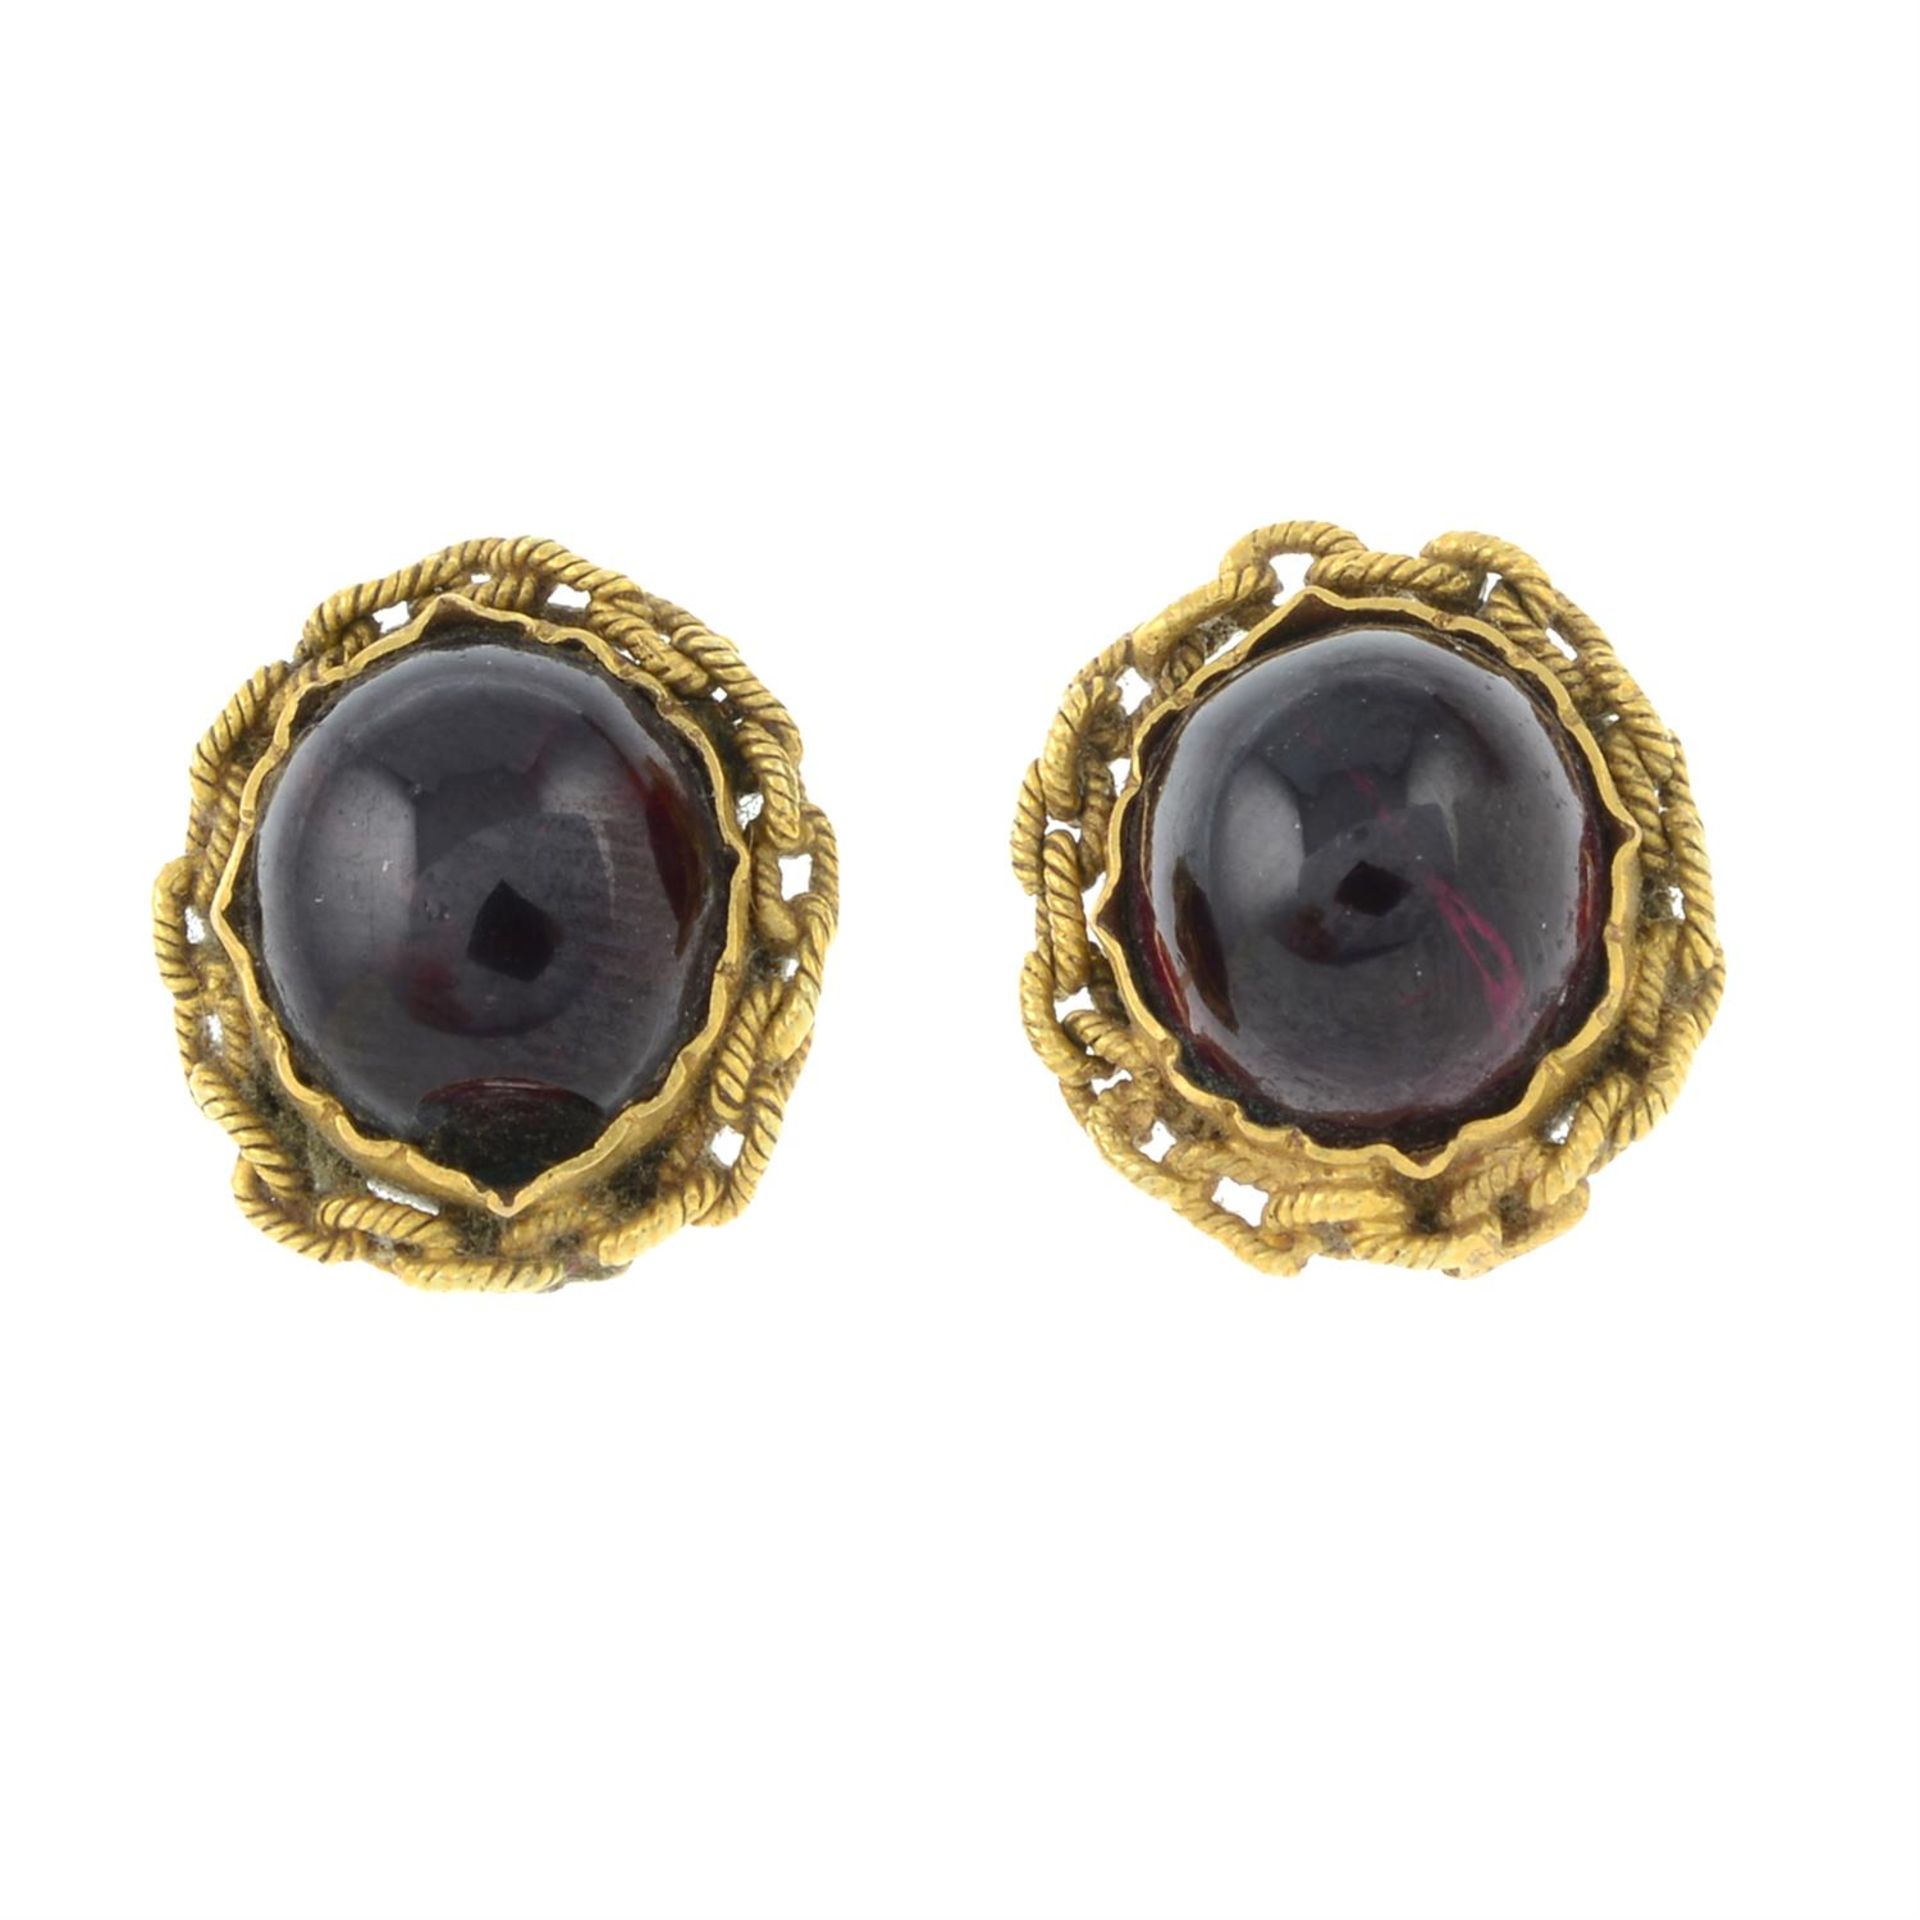 A pair of mid Victorian gold garnet cabochon stud earrings.